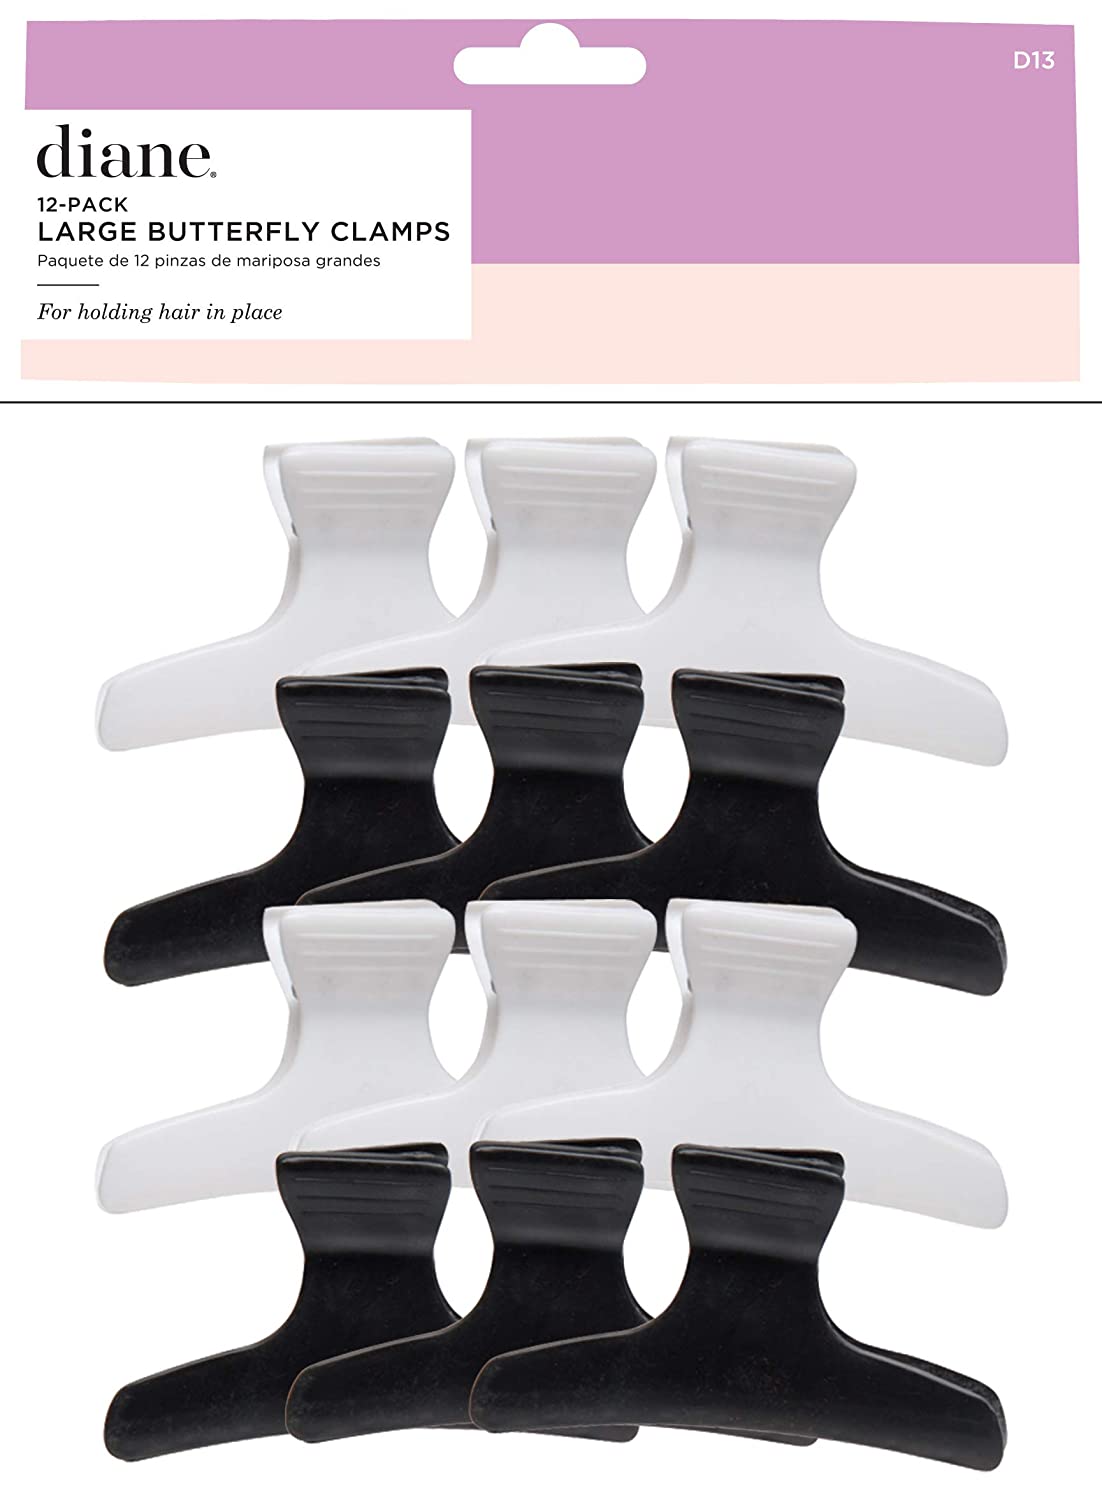 Diane Butterfly Clamps Large #D13